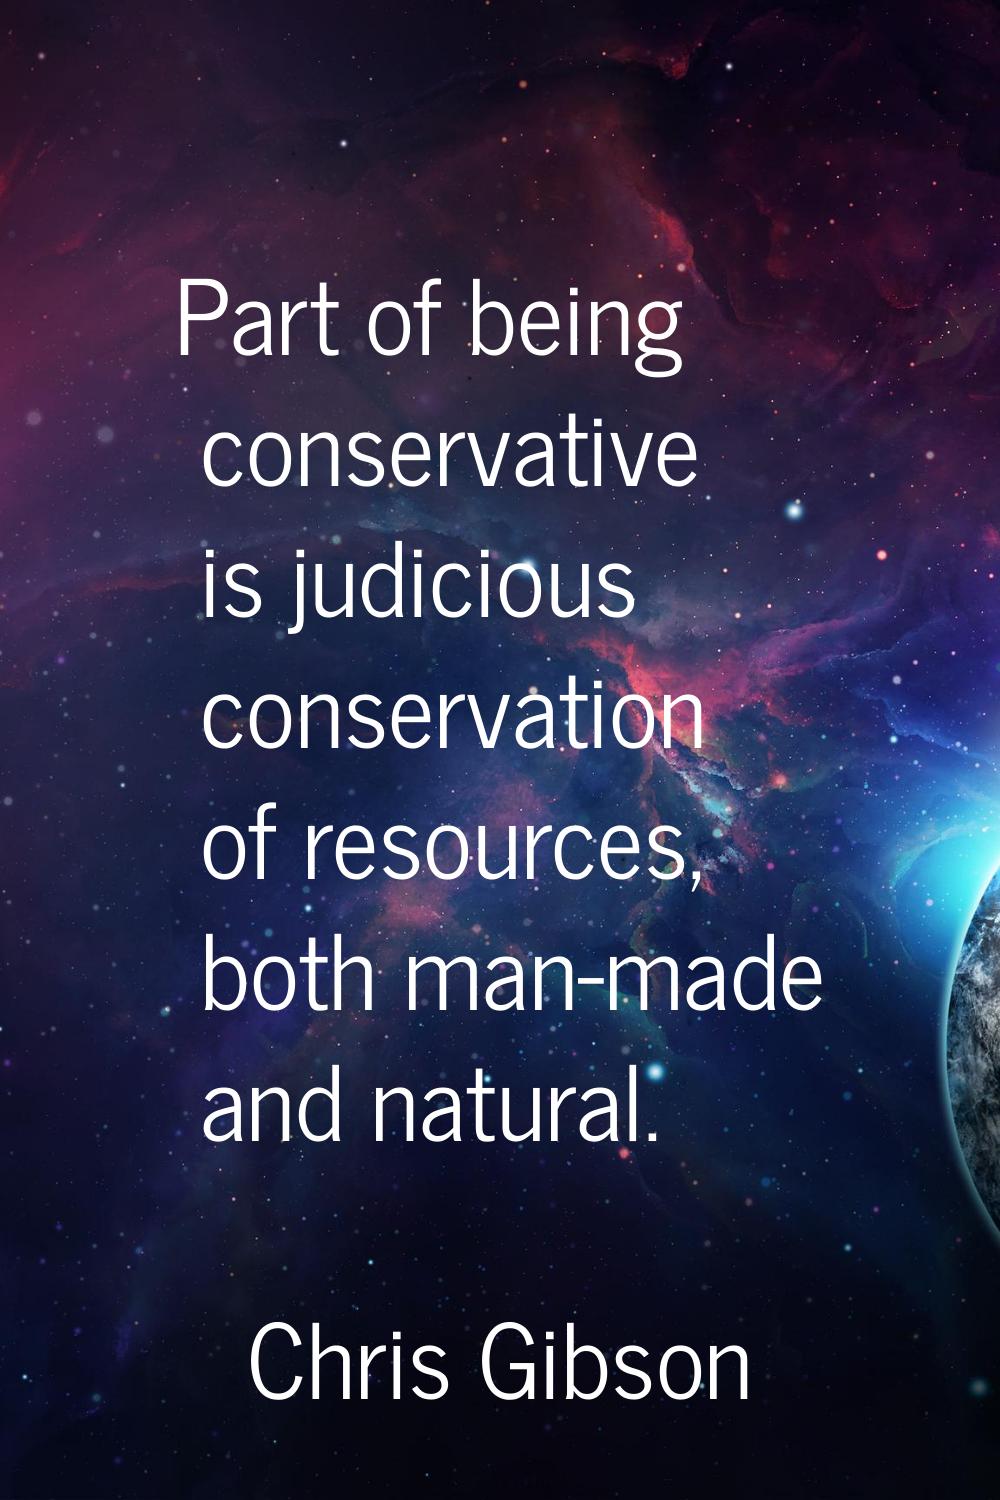 Part of being conservative is judicious conservation of resources, both man-made and natural.